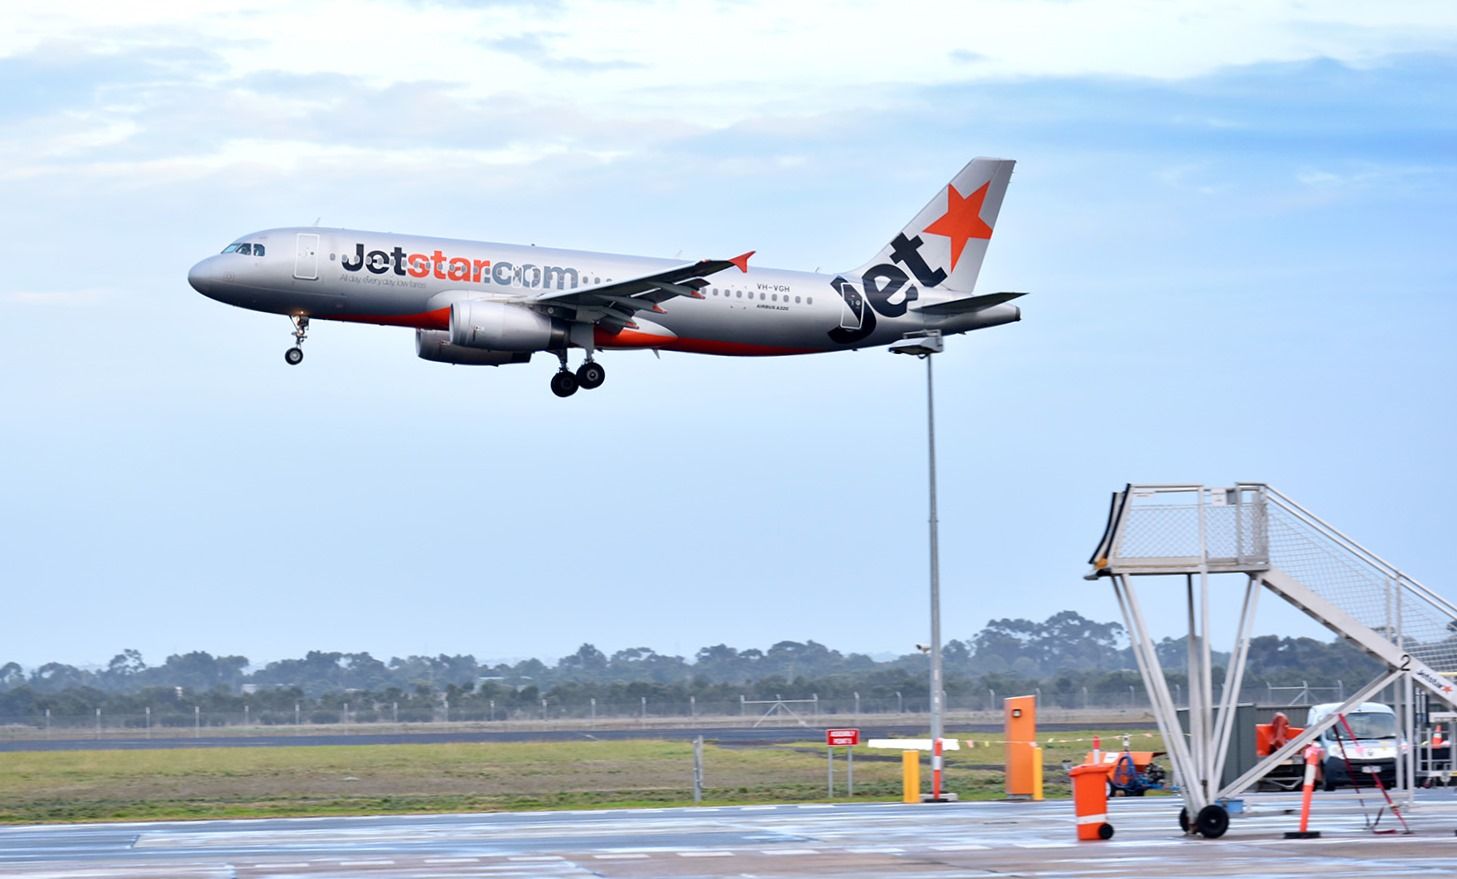 A Jetstar Airbus A320 taking off